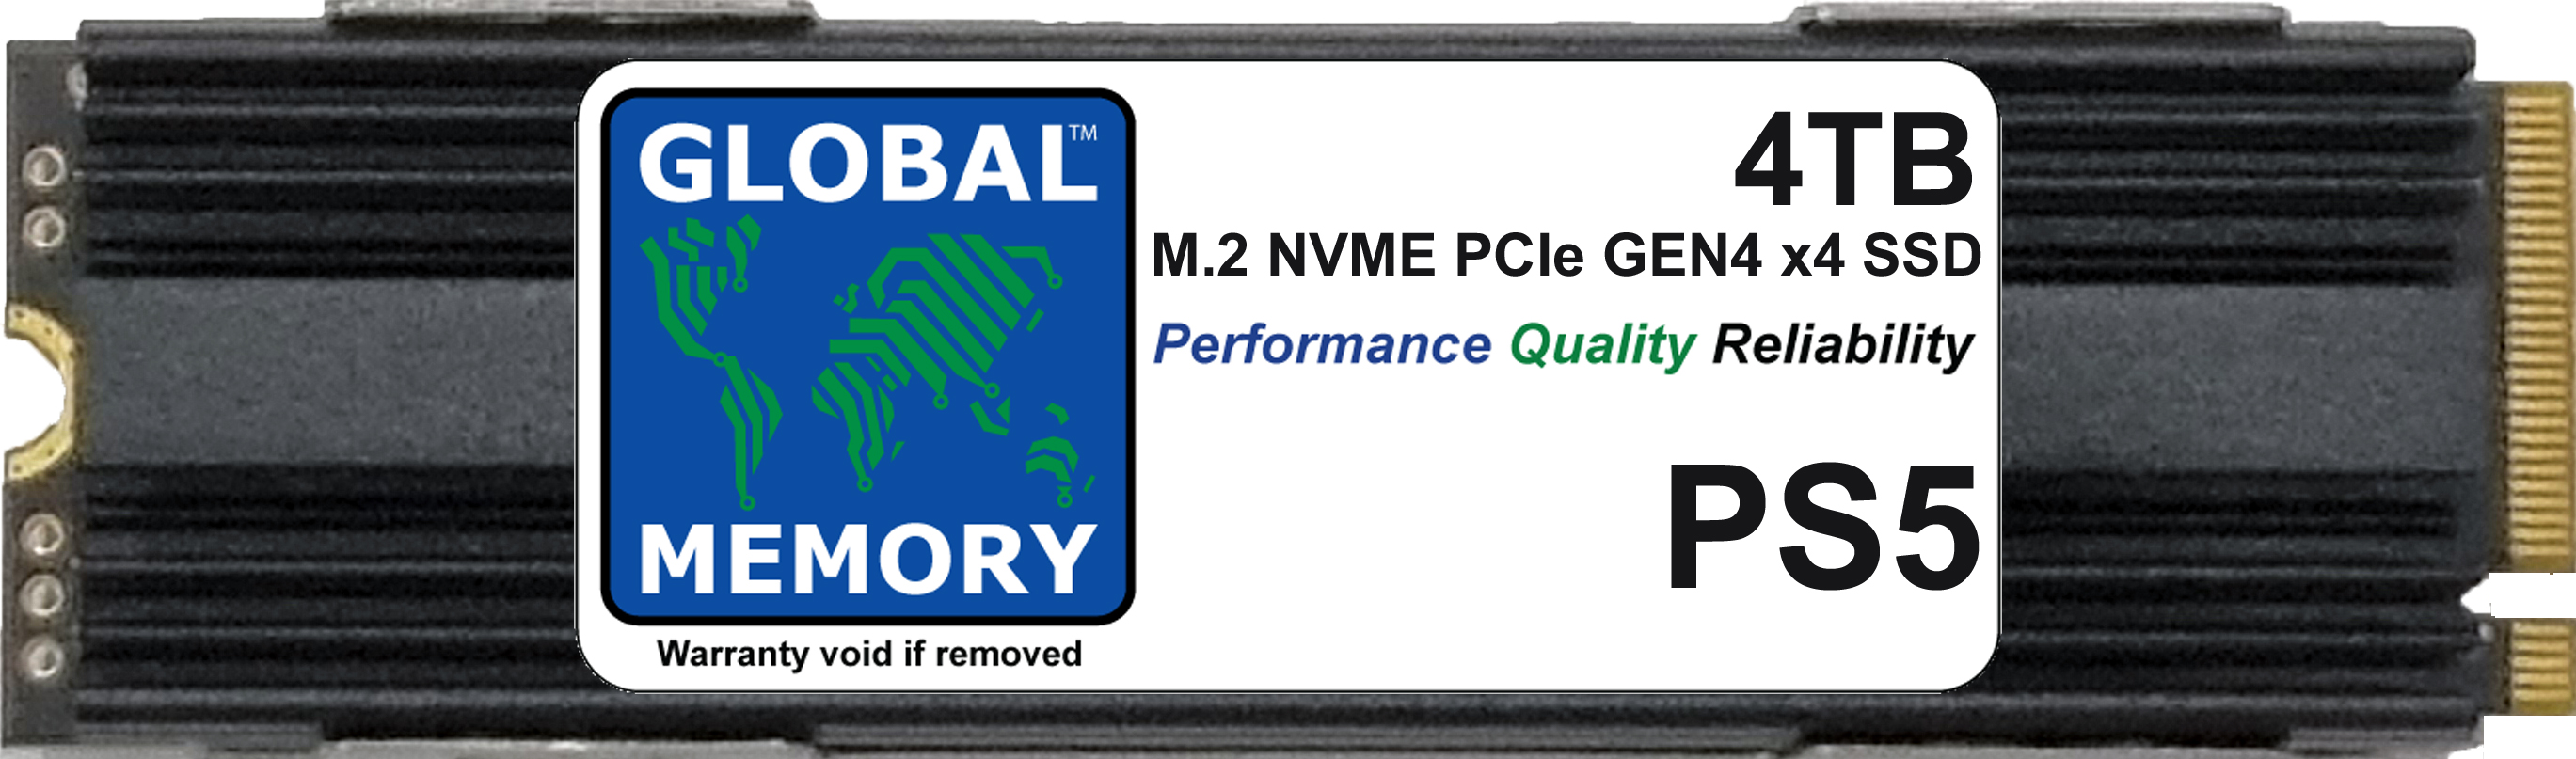 4TB M.2 2280 PCIe Gen4 x4 NVMe SSD WITH DRAM + HEATSINK FOR PLAYSTATION 5 (PS5)